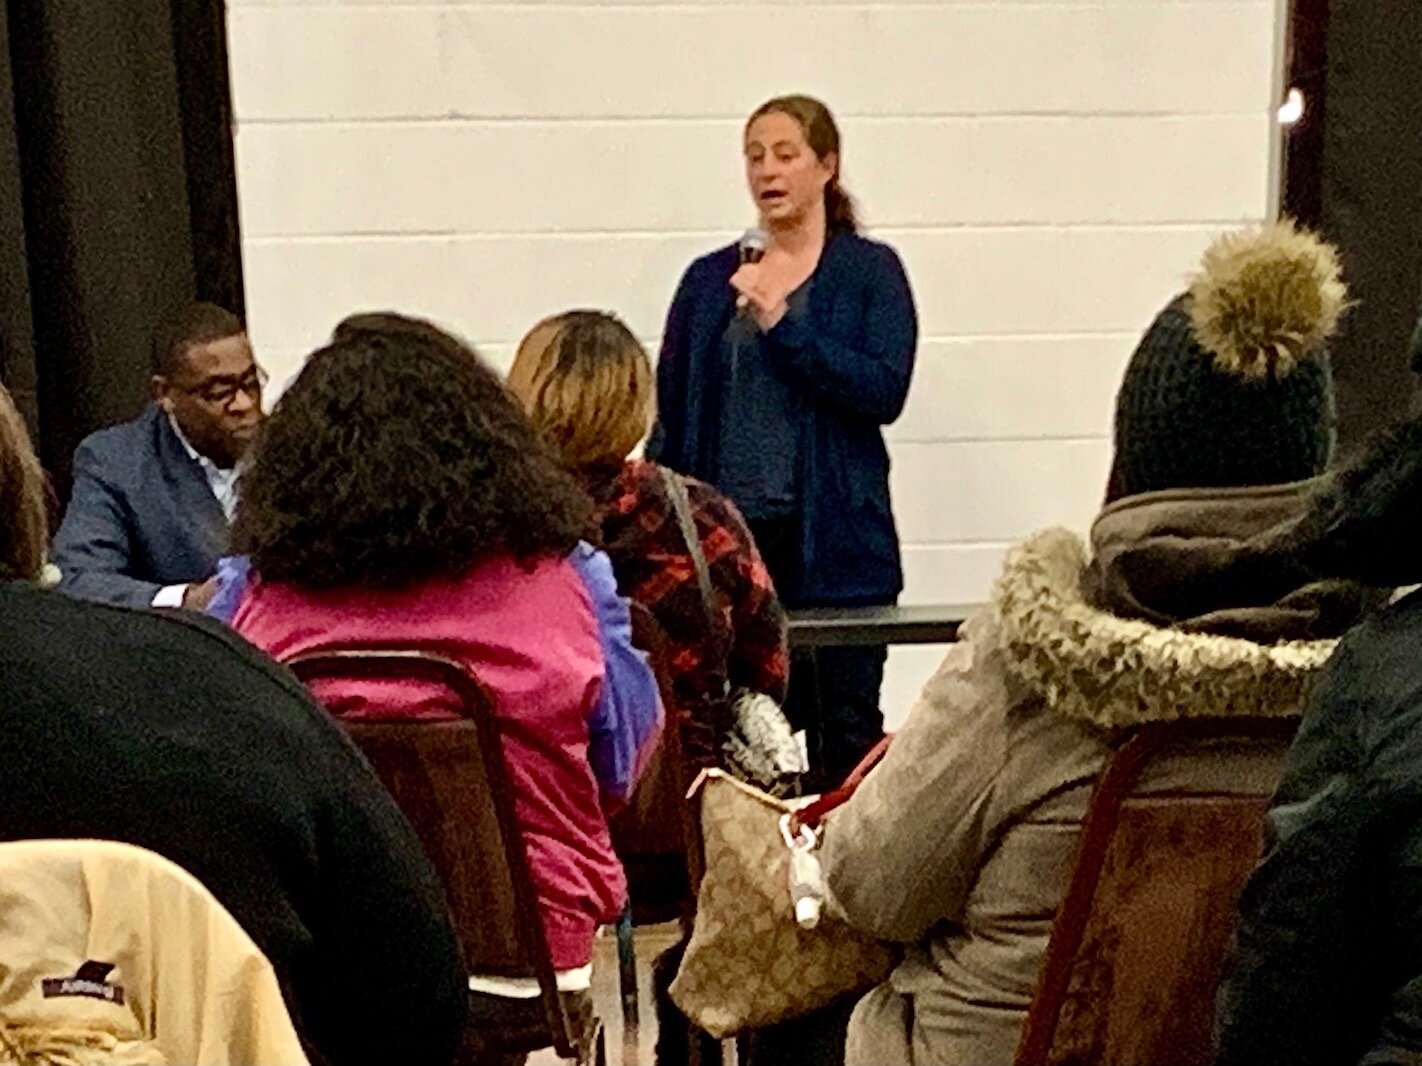 Kalamazoo City Planner Christina Anderson explains Kalamazoo’s new Emergency Housing Ordinance during a meeting on housing Tuesday evening (Dec. 7, 2021) at the Northside Association for Community Development.